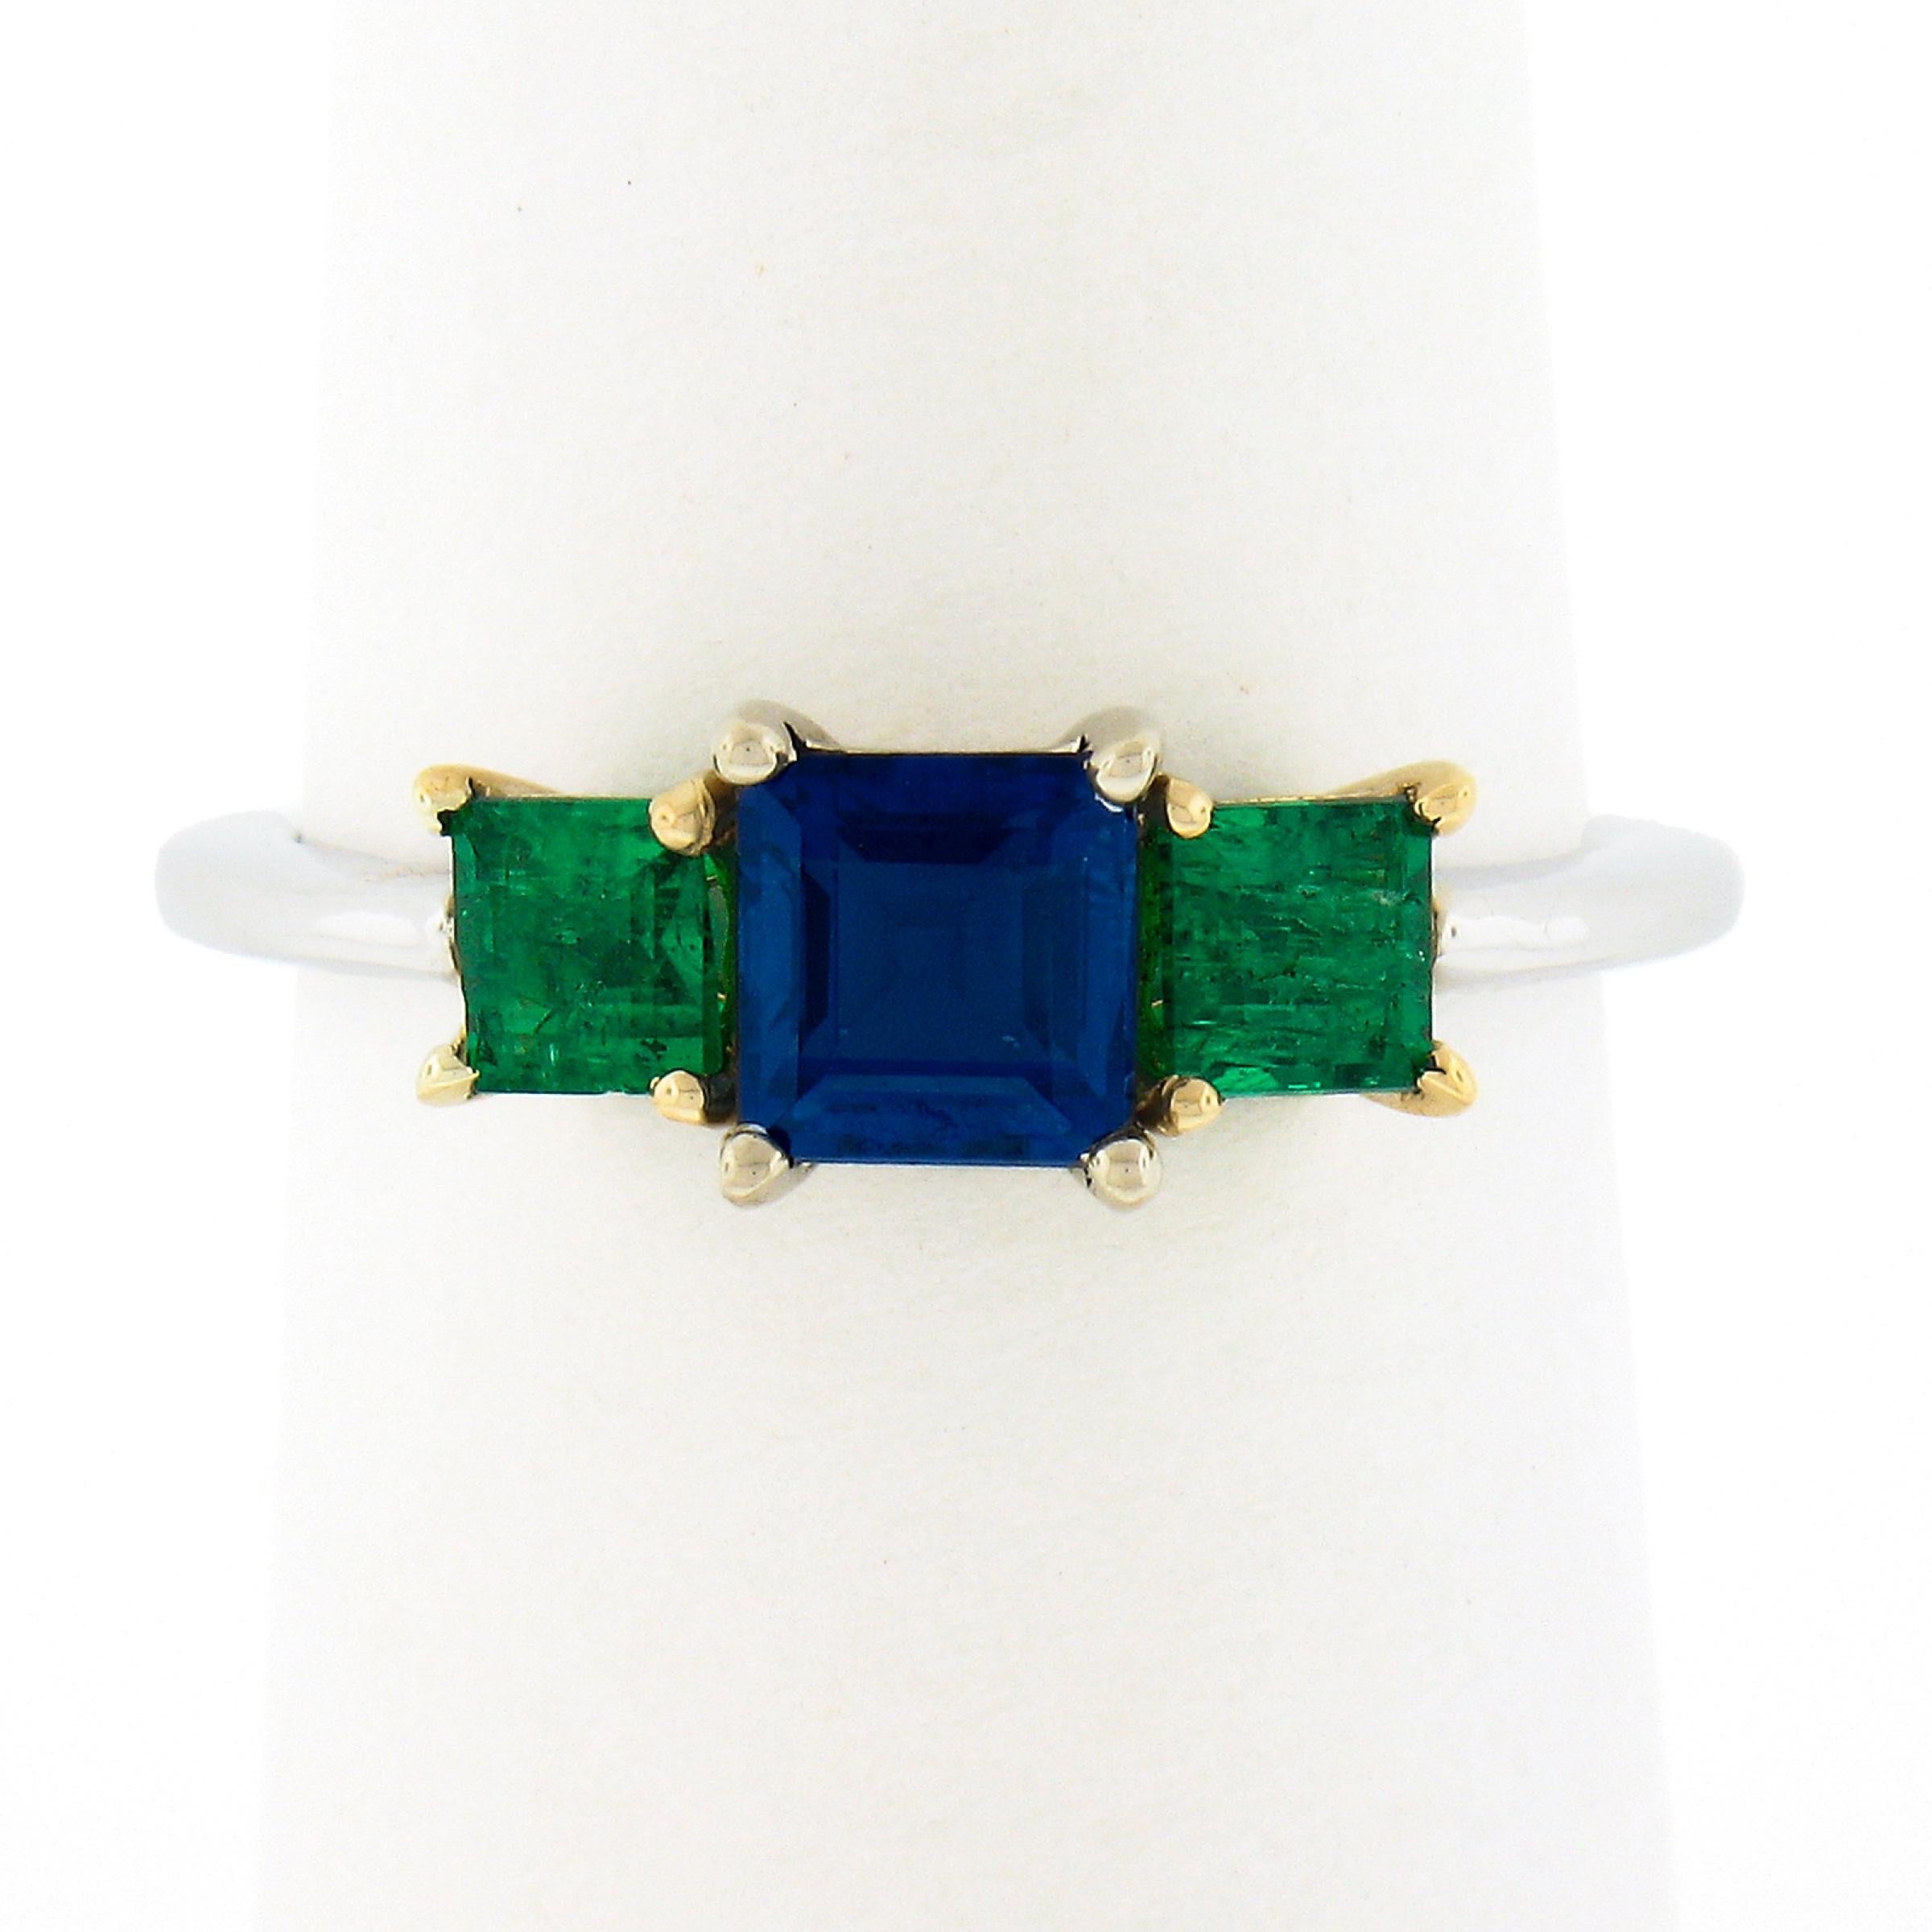 You are looking at an absolutely gorgeous, custom made, sapphire and emerald three stone ring that is newly crafted in solid 18k white gold with yellow gold side basket settings. The ring features a beautiful, GIA certified, square step cut sapphire